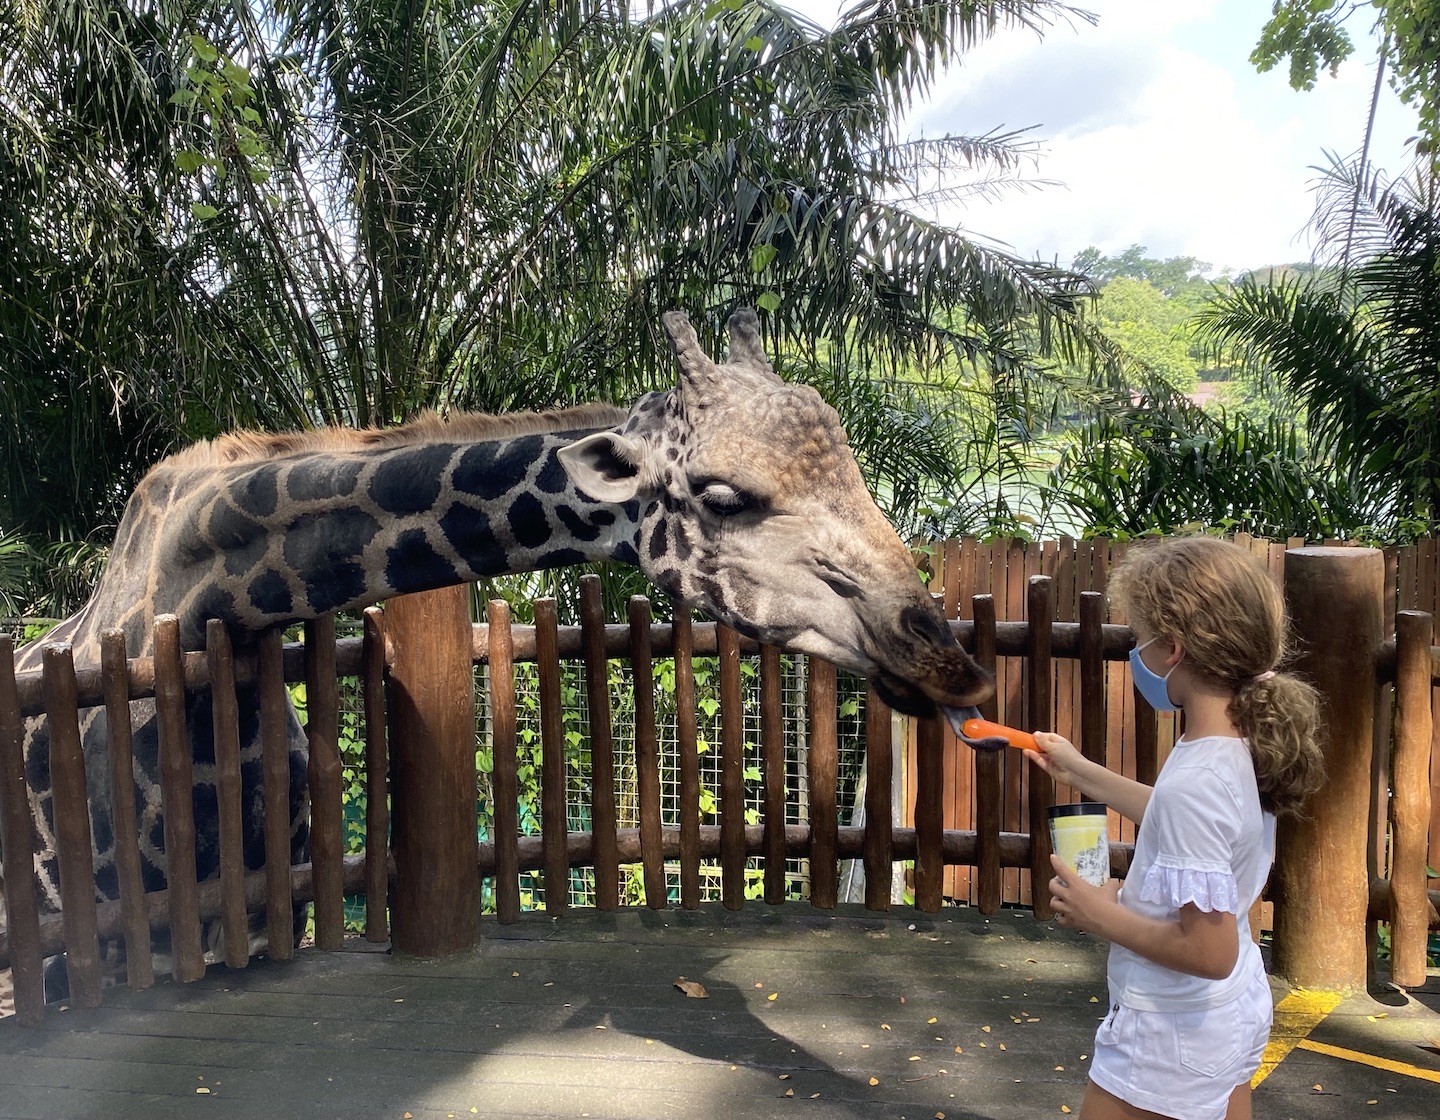 Kids activities in Singapore for small kids and teens - visit the Singapore Zoo